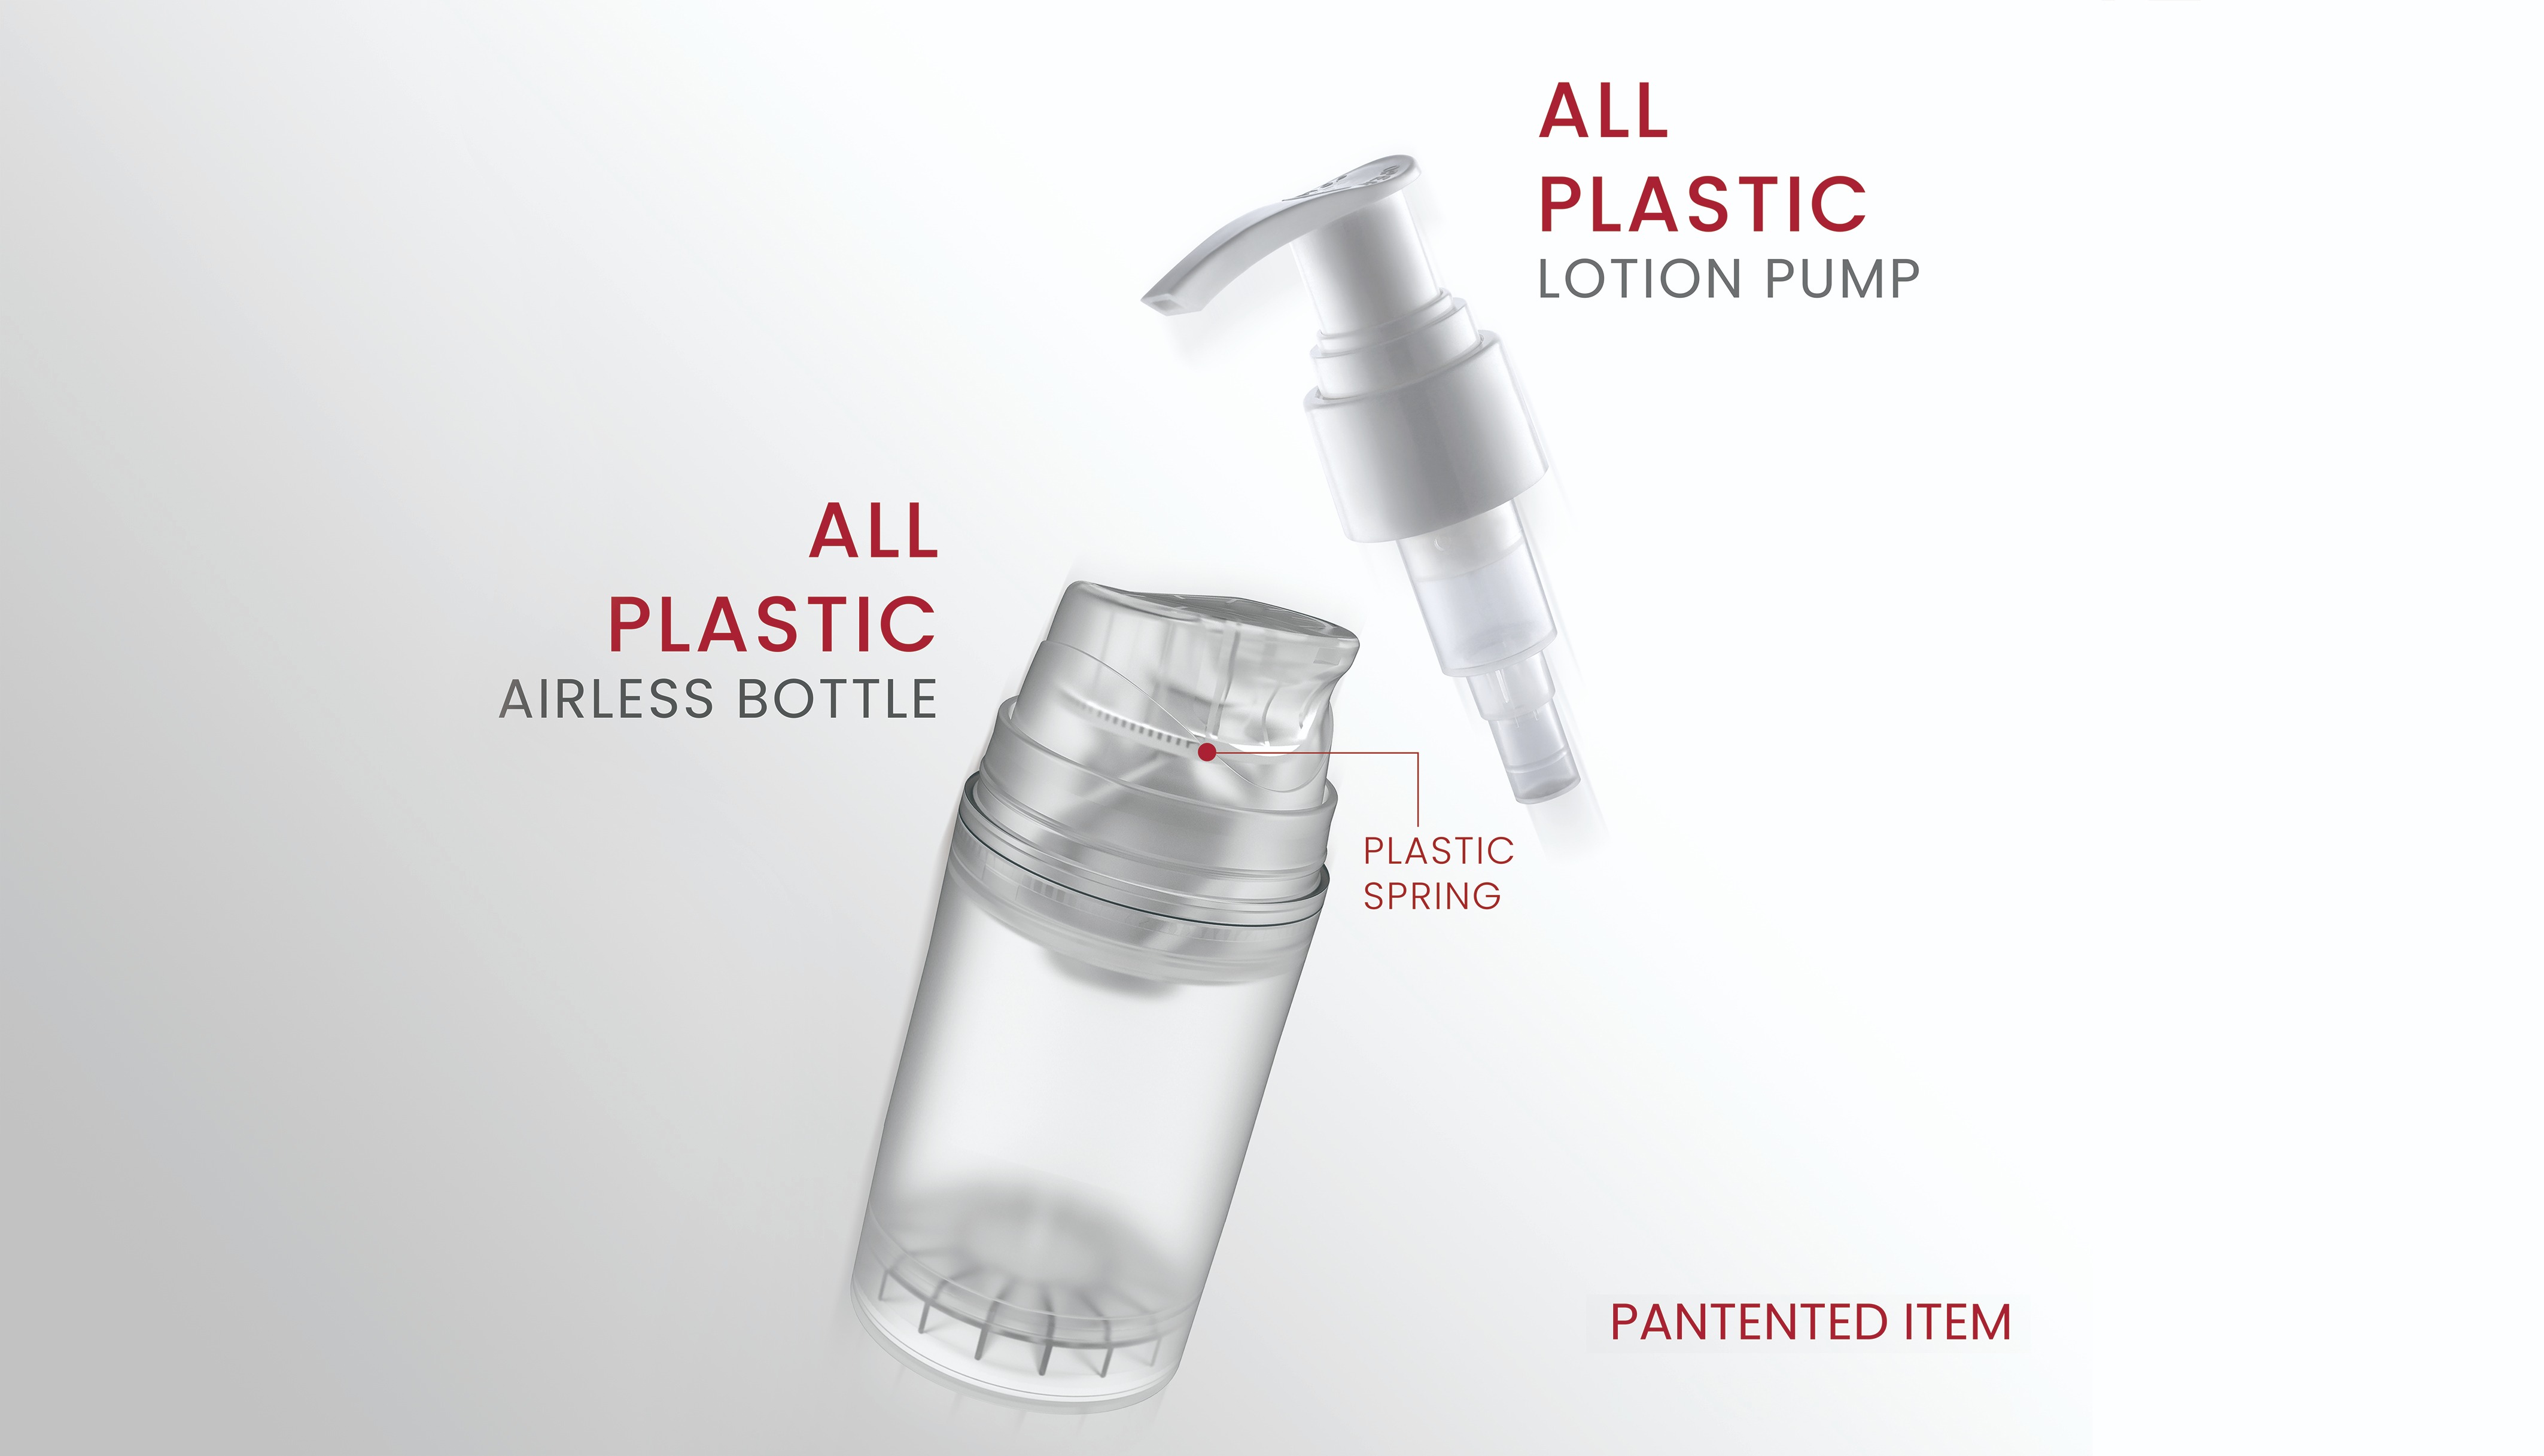 All Plastic Airless Bottle And Lotion Pump 1584